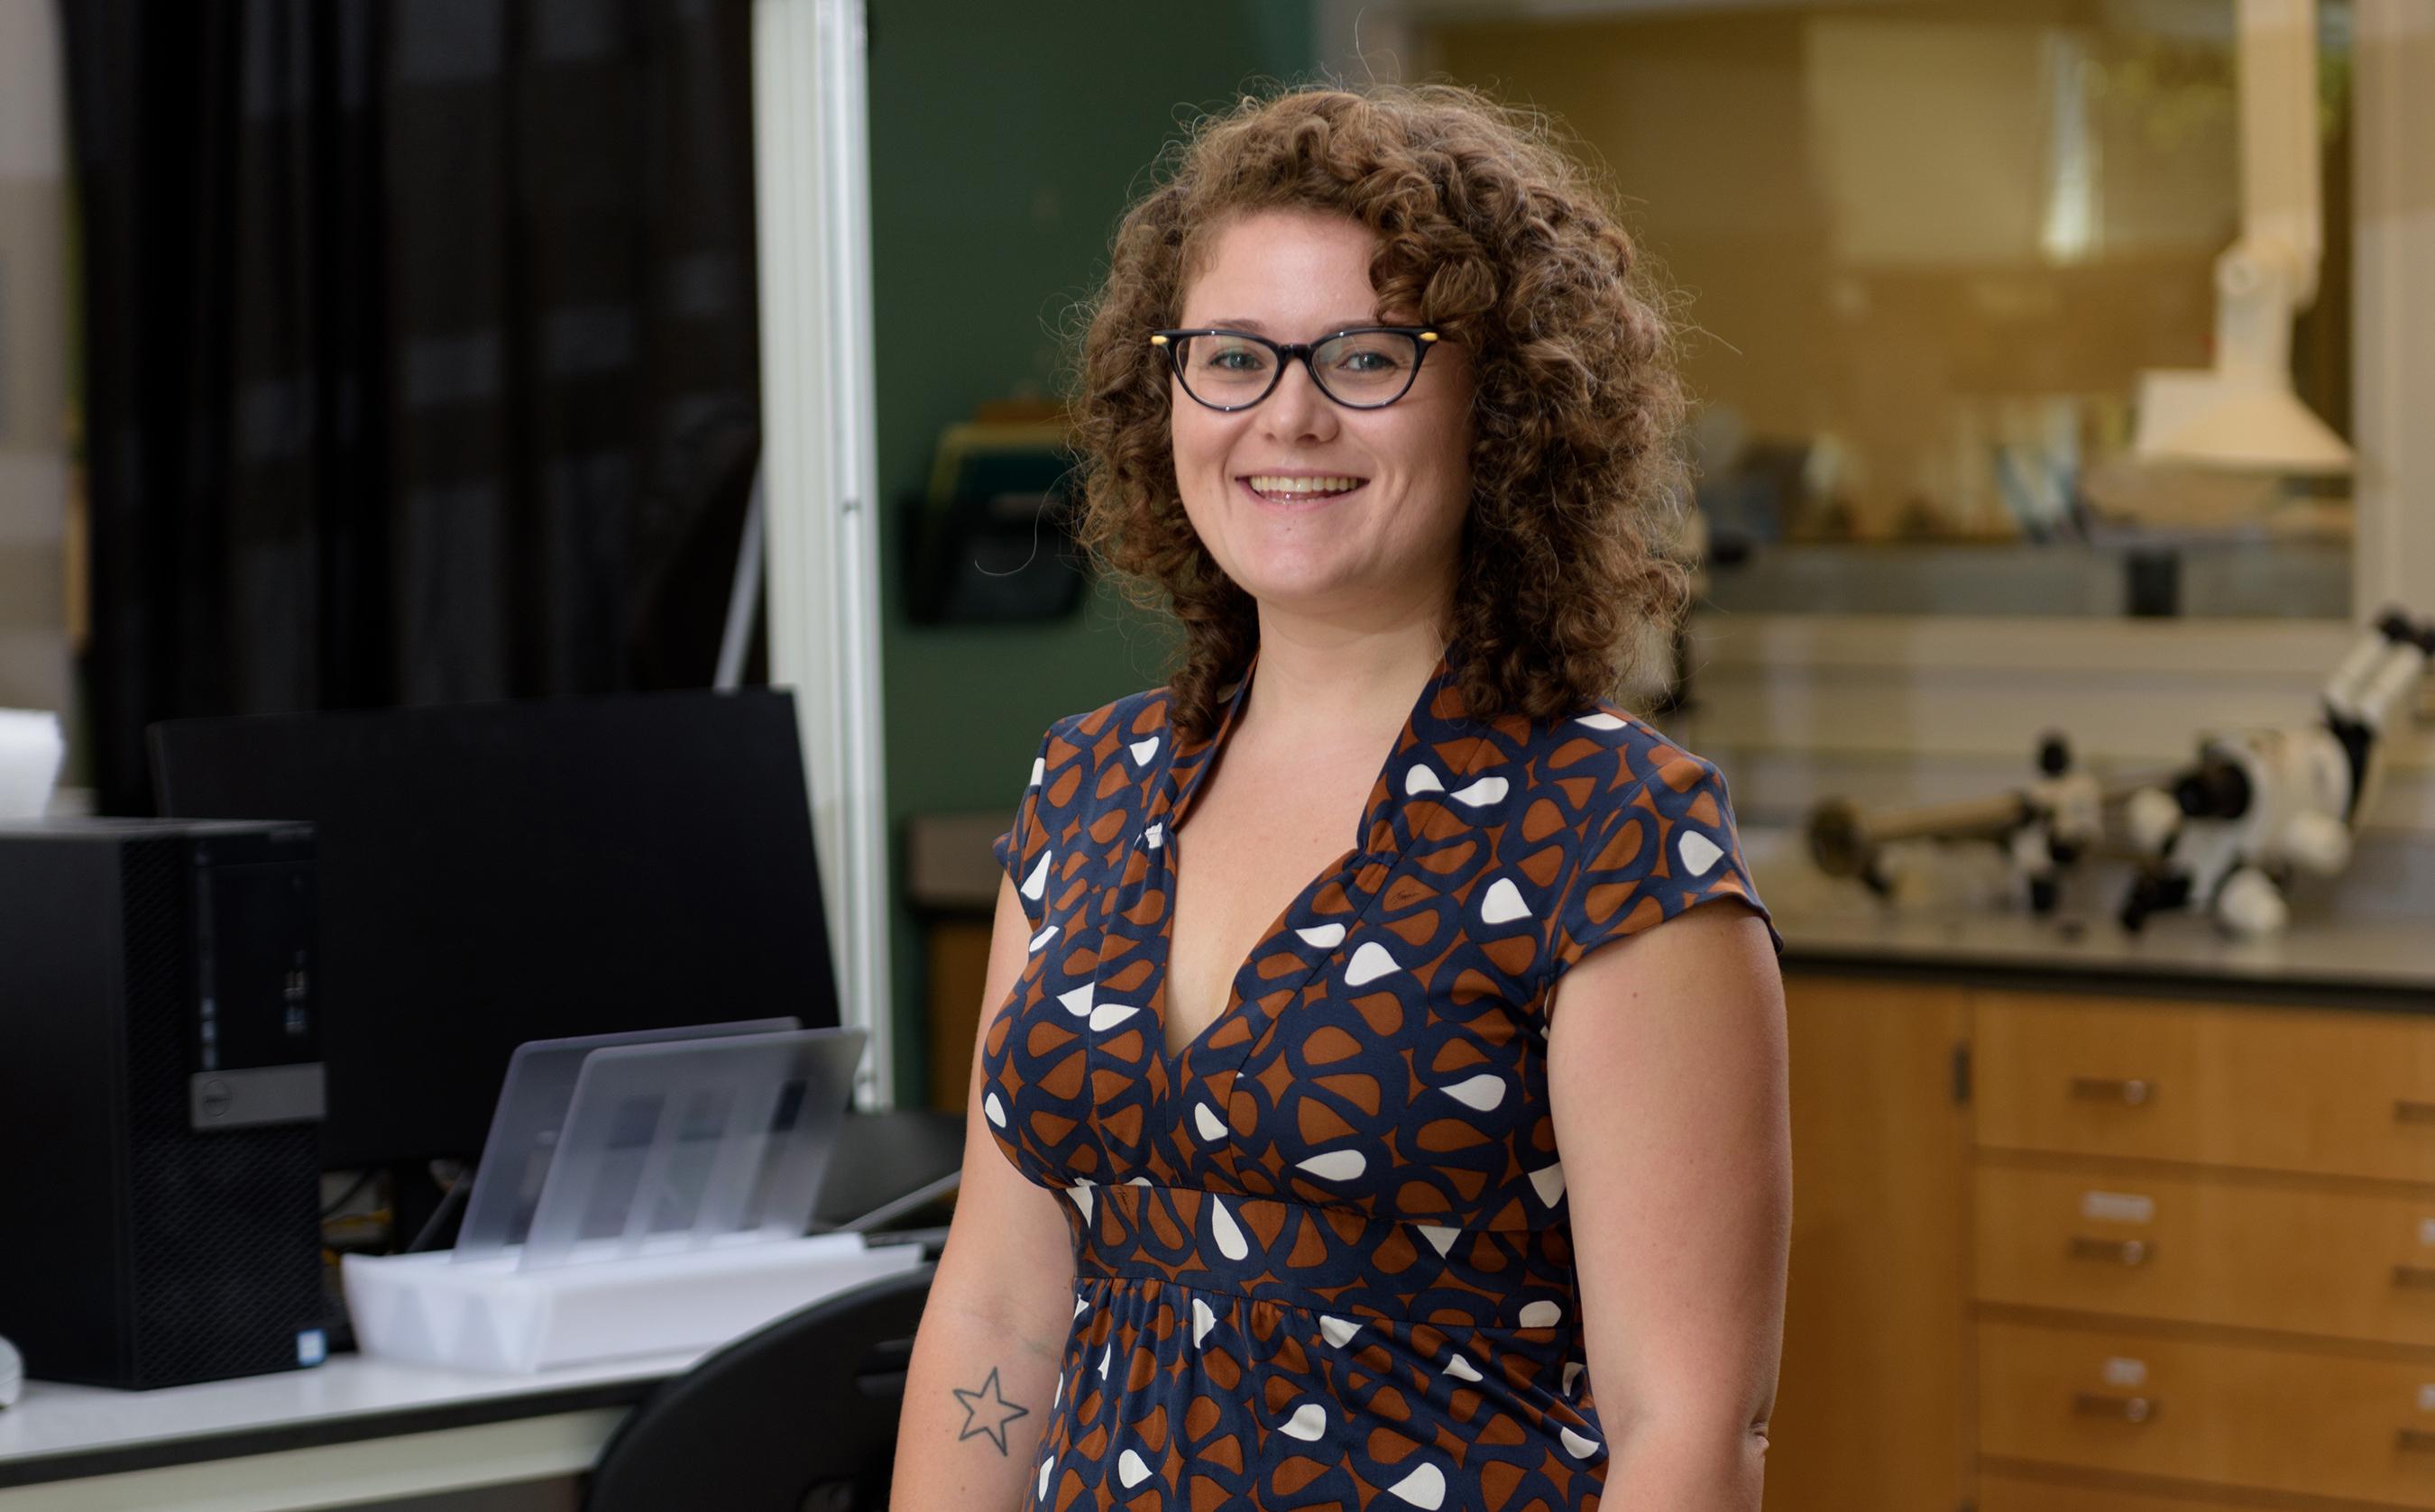 Eva Dyer, assistant professor in the Wallace H. Coulter Department of Biomedical Engineering at Georgia Tech and Emory University, is principal investigator of the NerDS Lab.